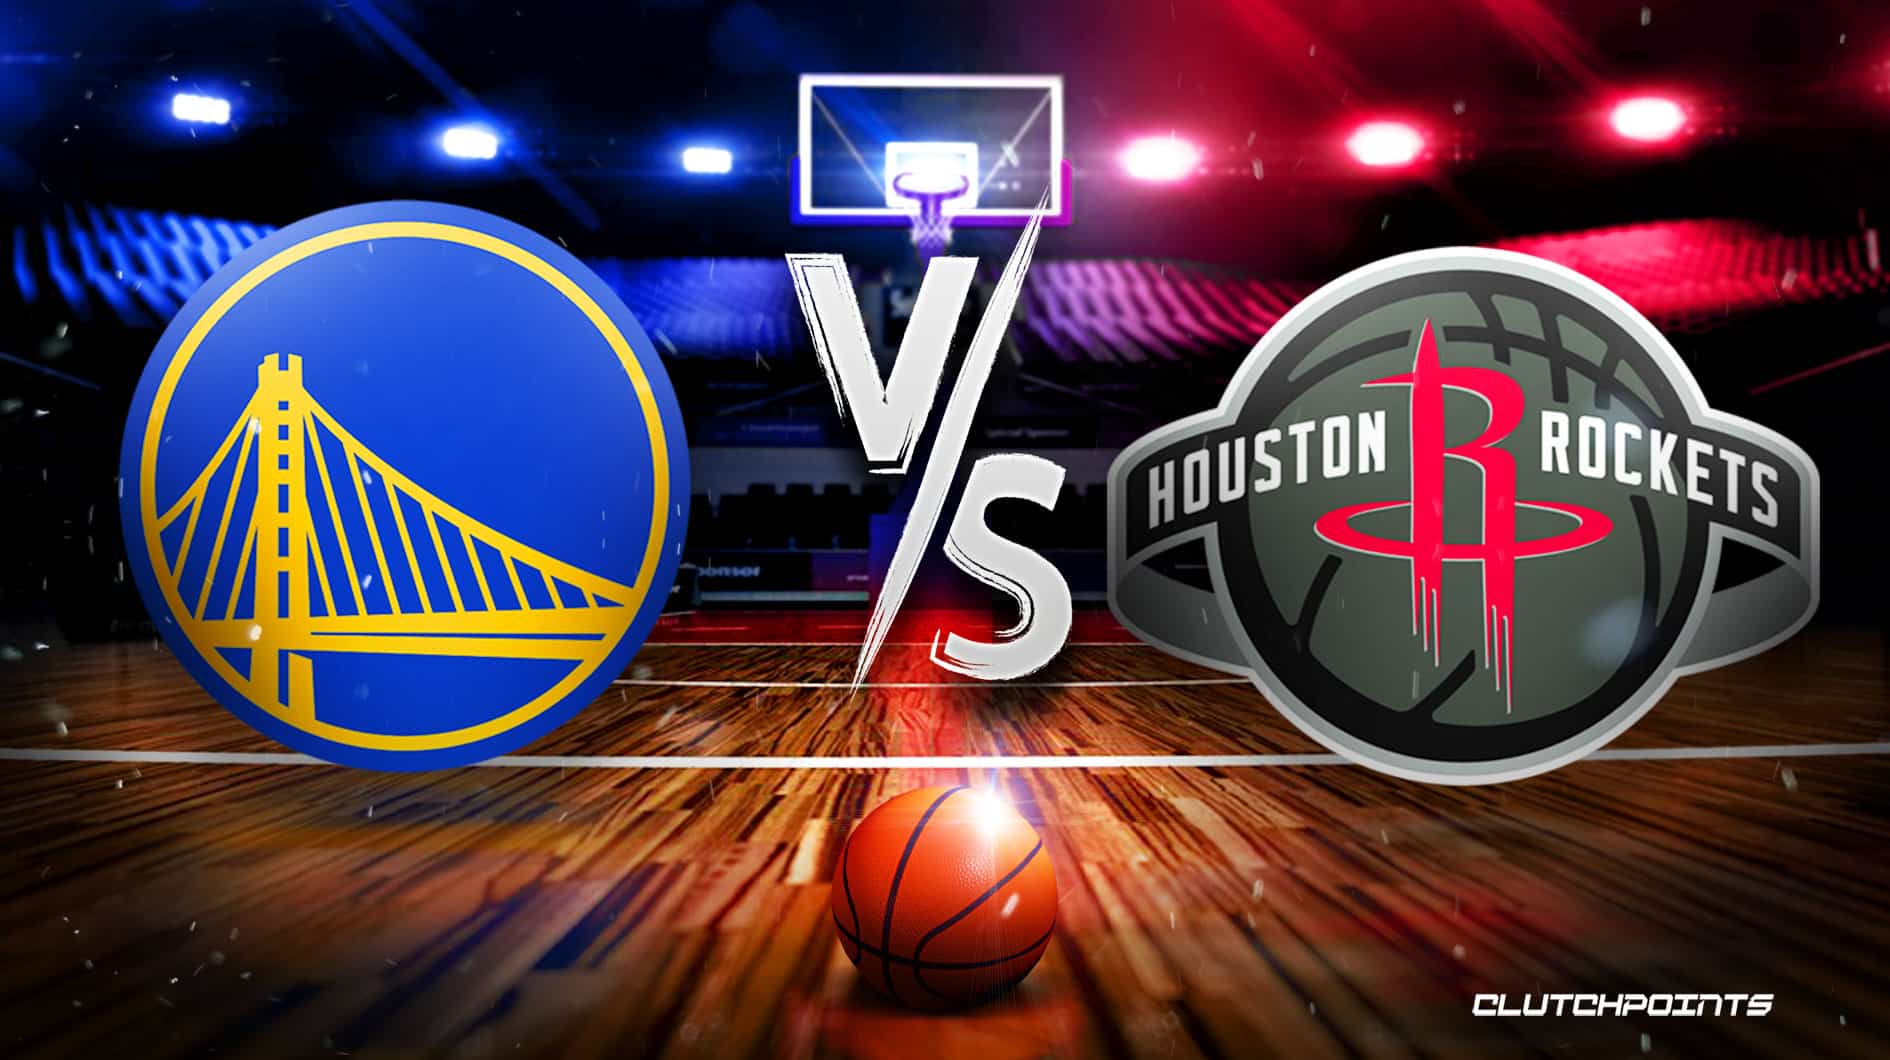 Golden State Warriors vs Houston Rockets Prediction & Match Preview -  January 31st, 2022